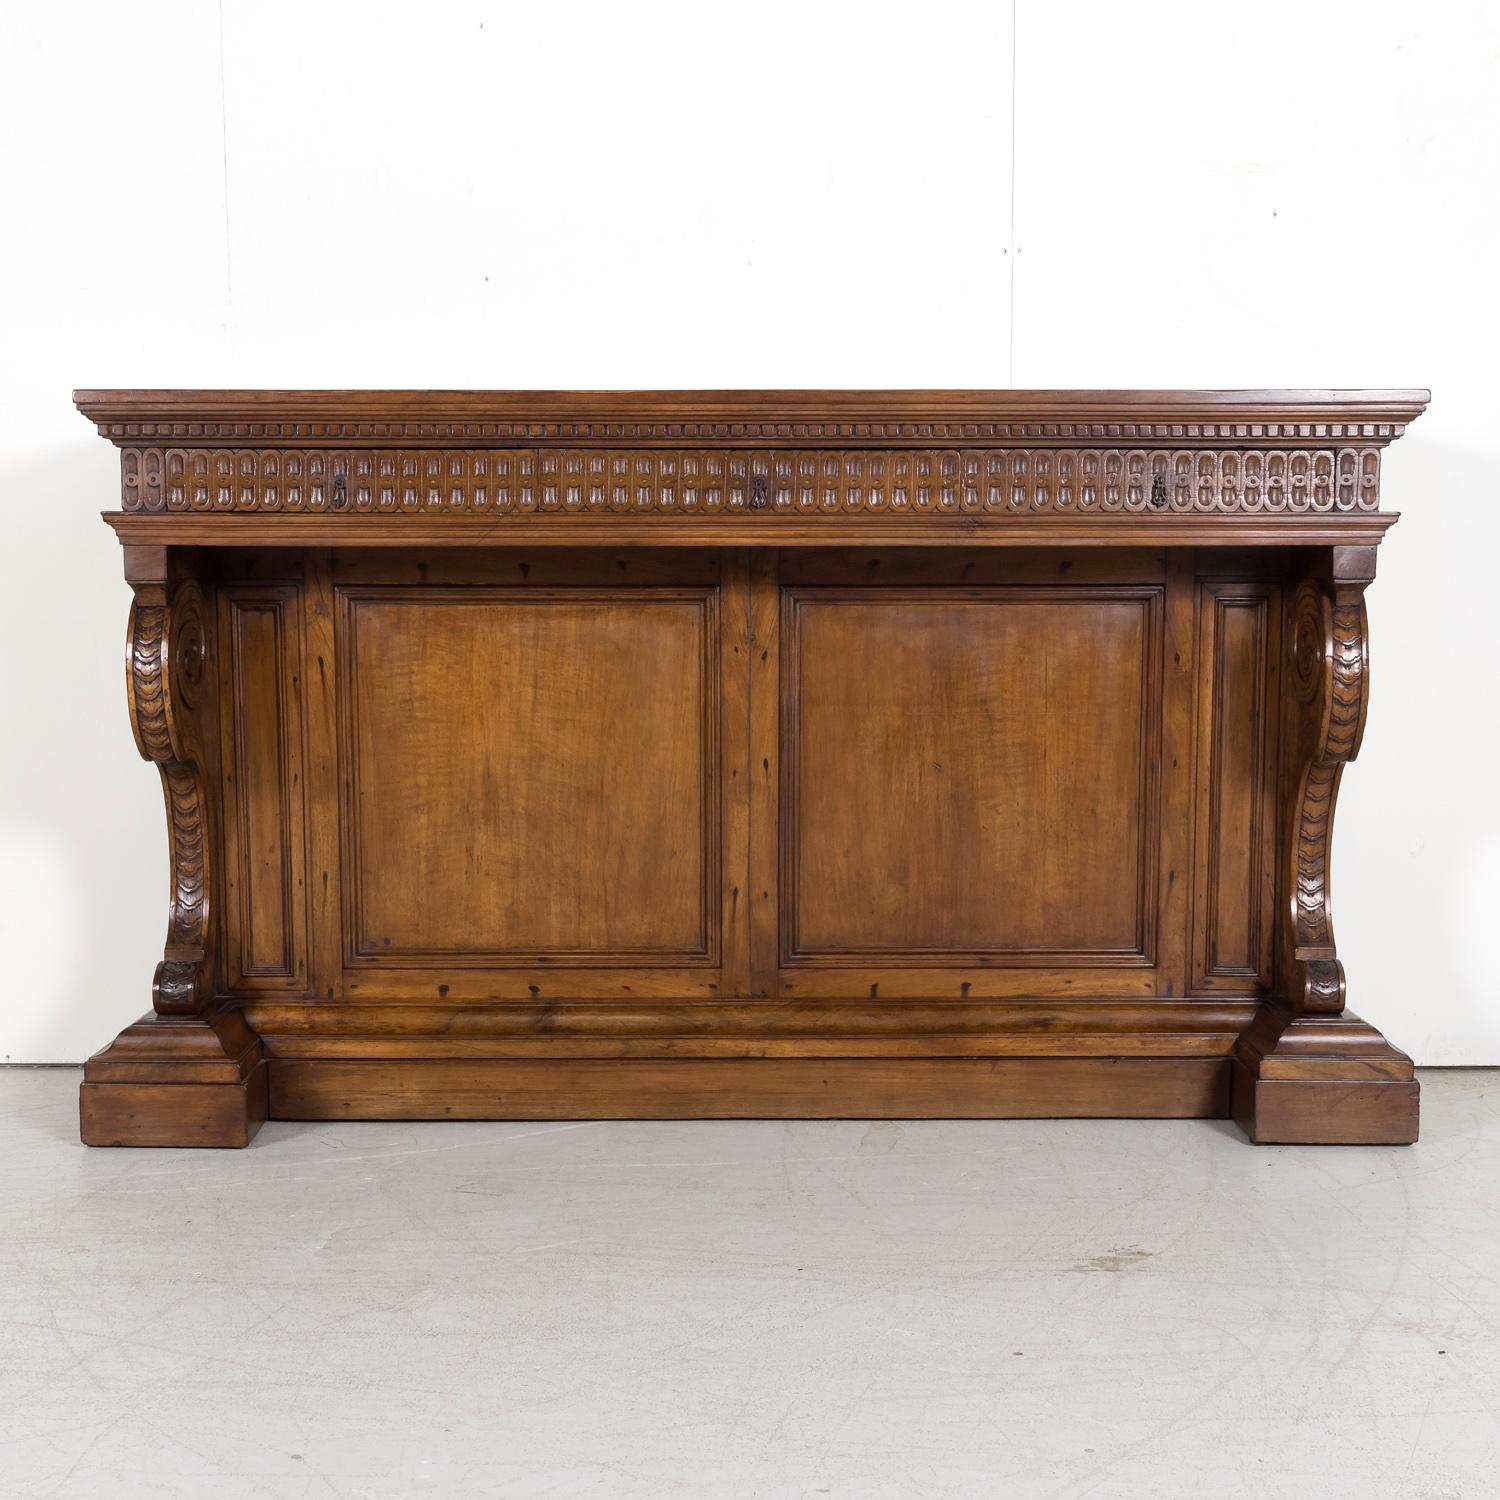 19th Century, Spanish Renaissance Style Carved Walnut Wall Console with Drawers In Good Condition For Sale In Birmingham, AL